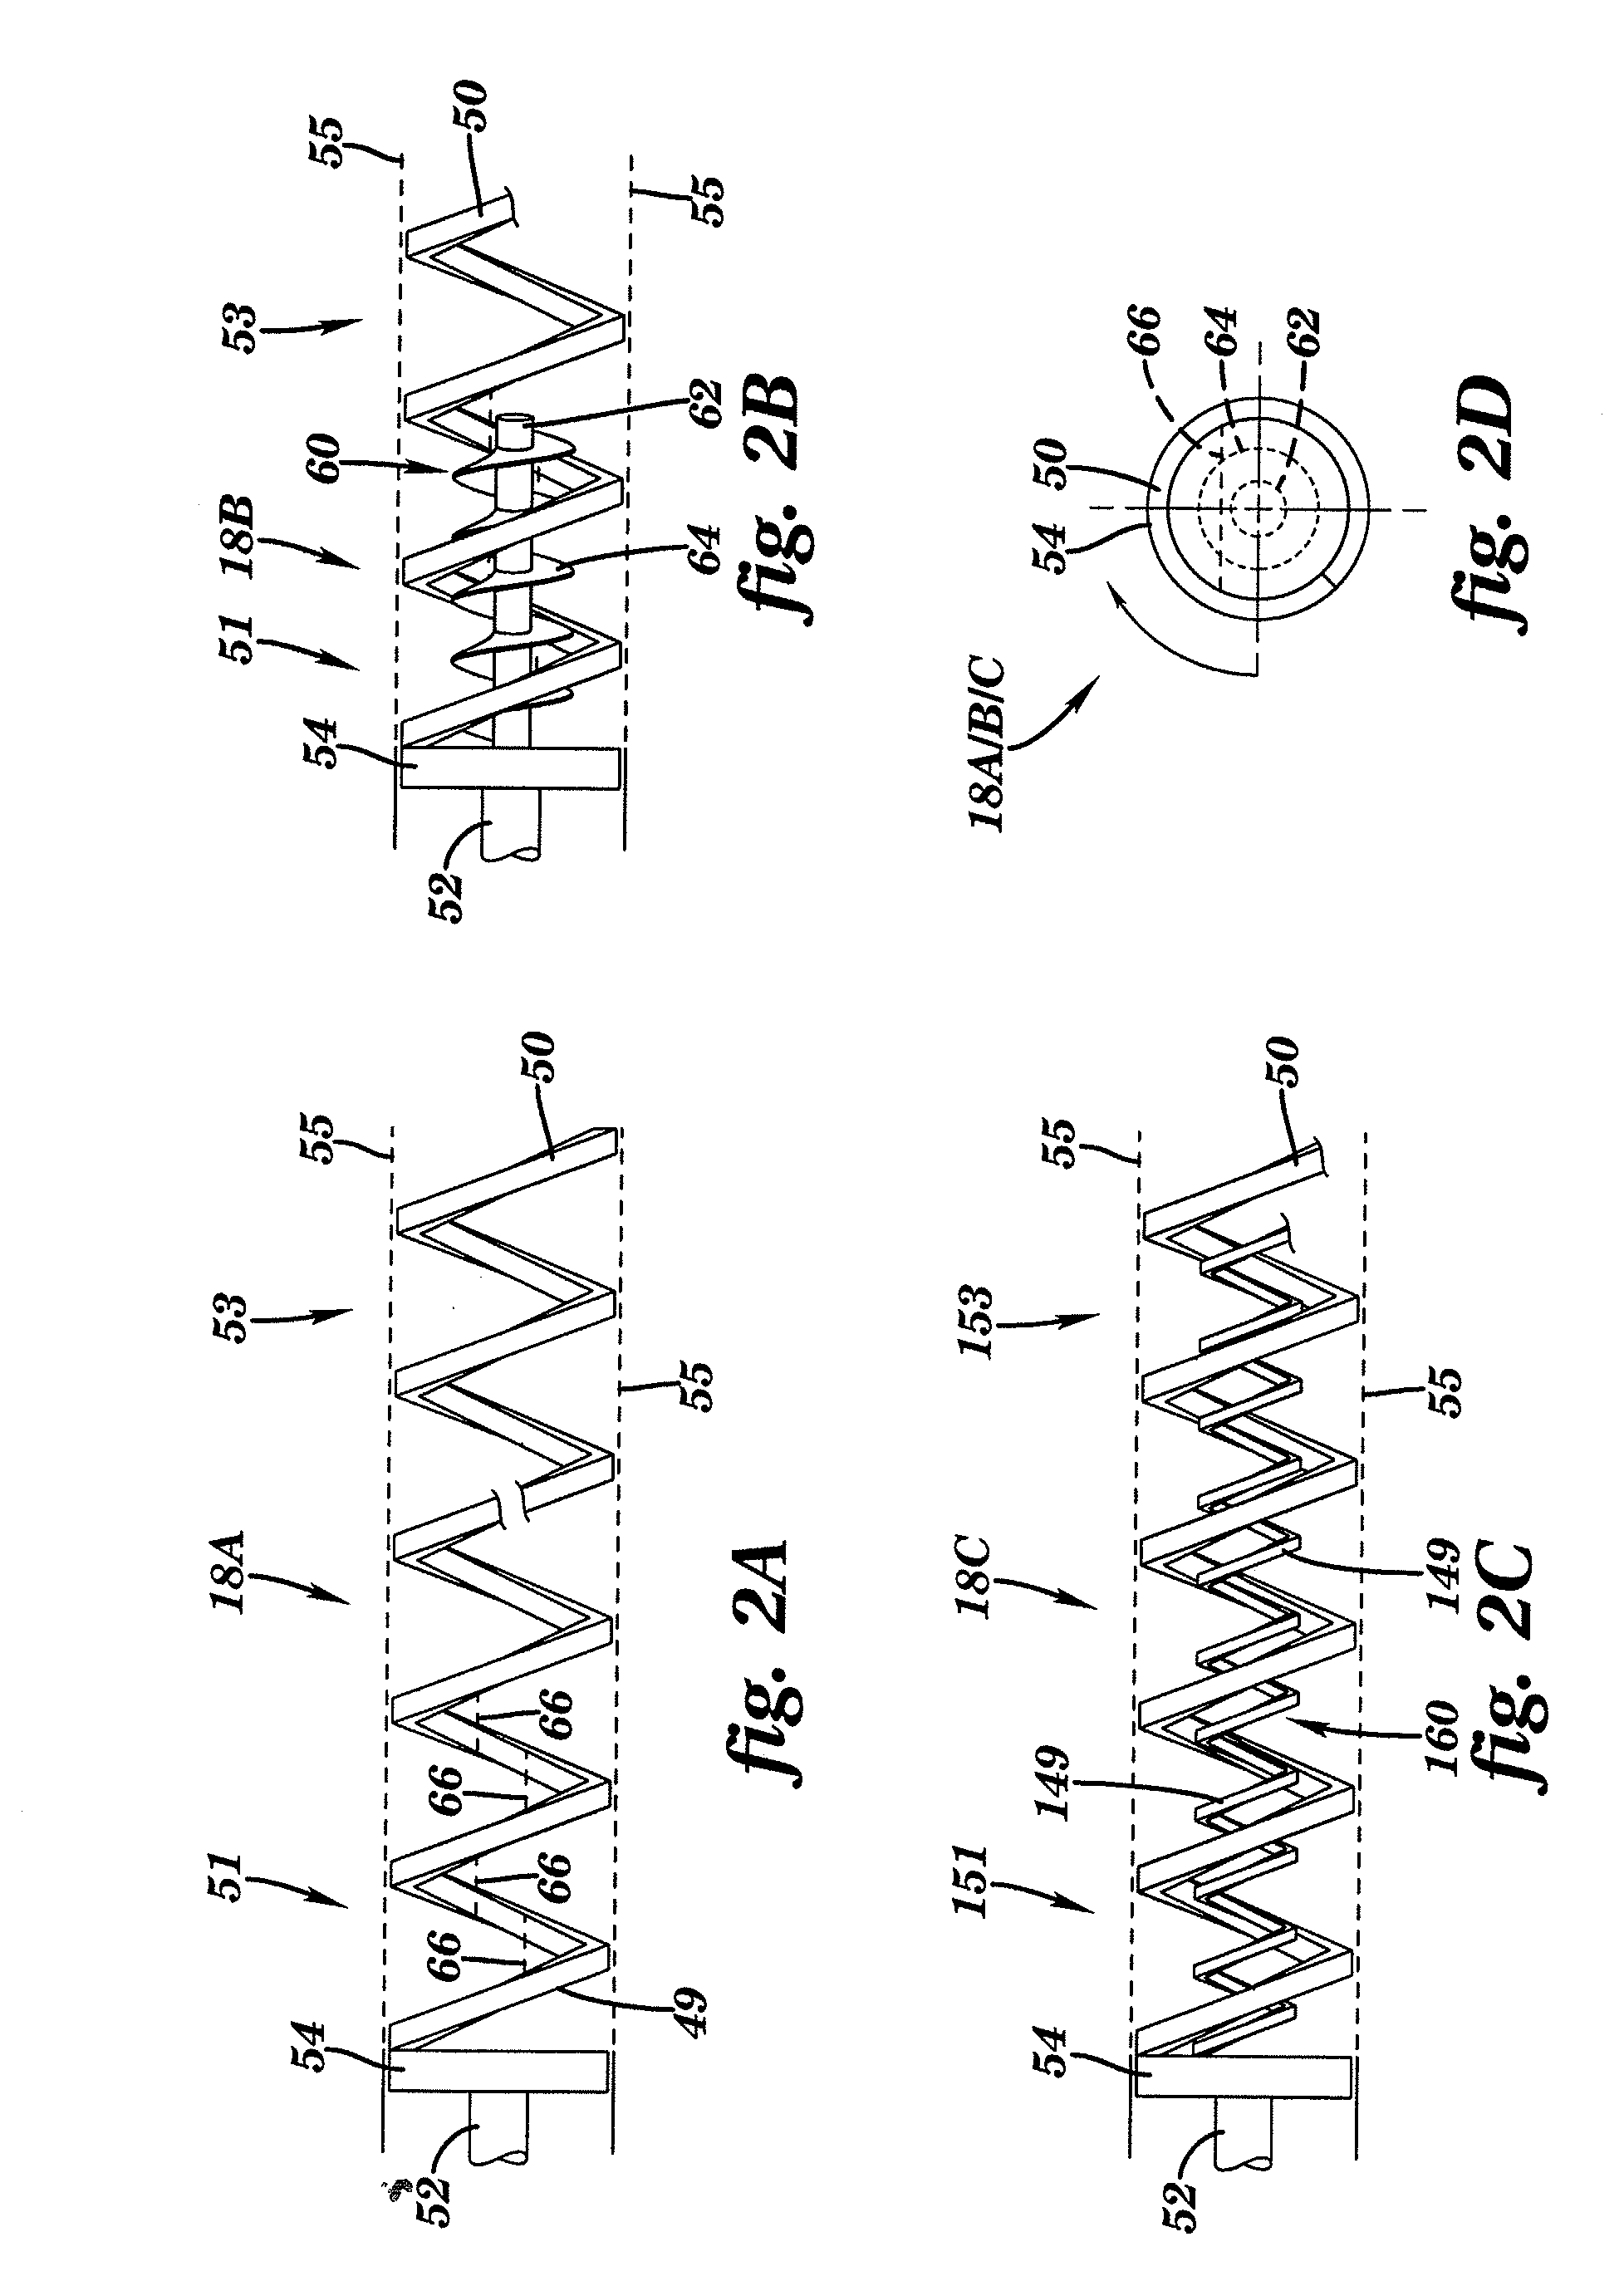 Methods and apparatus for pyrolyzing material